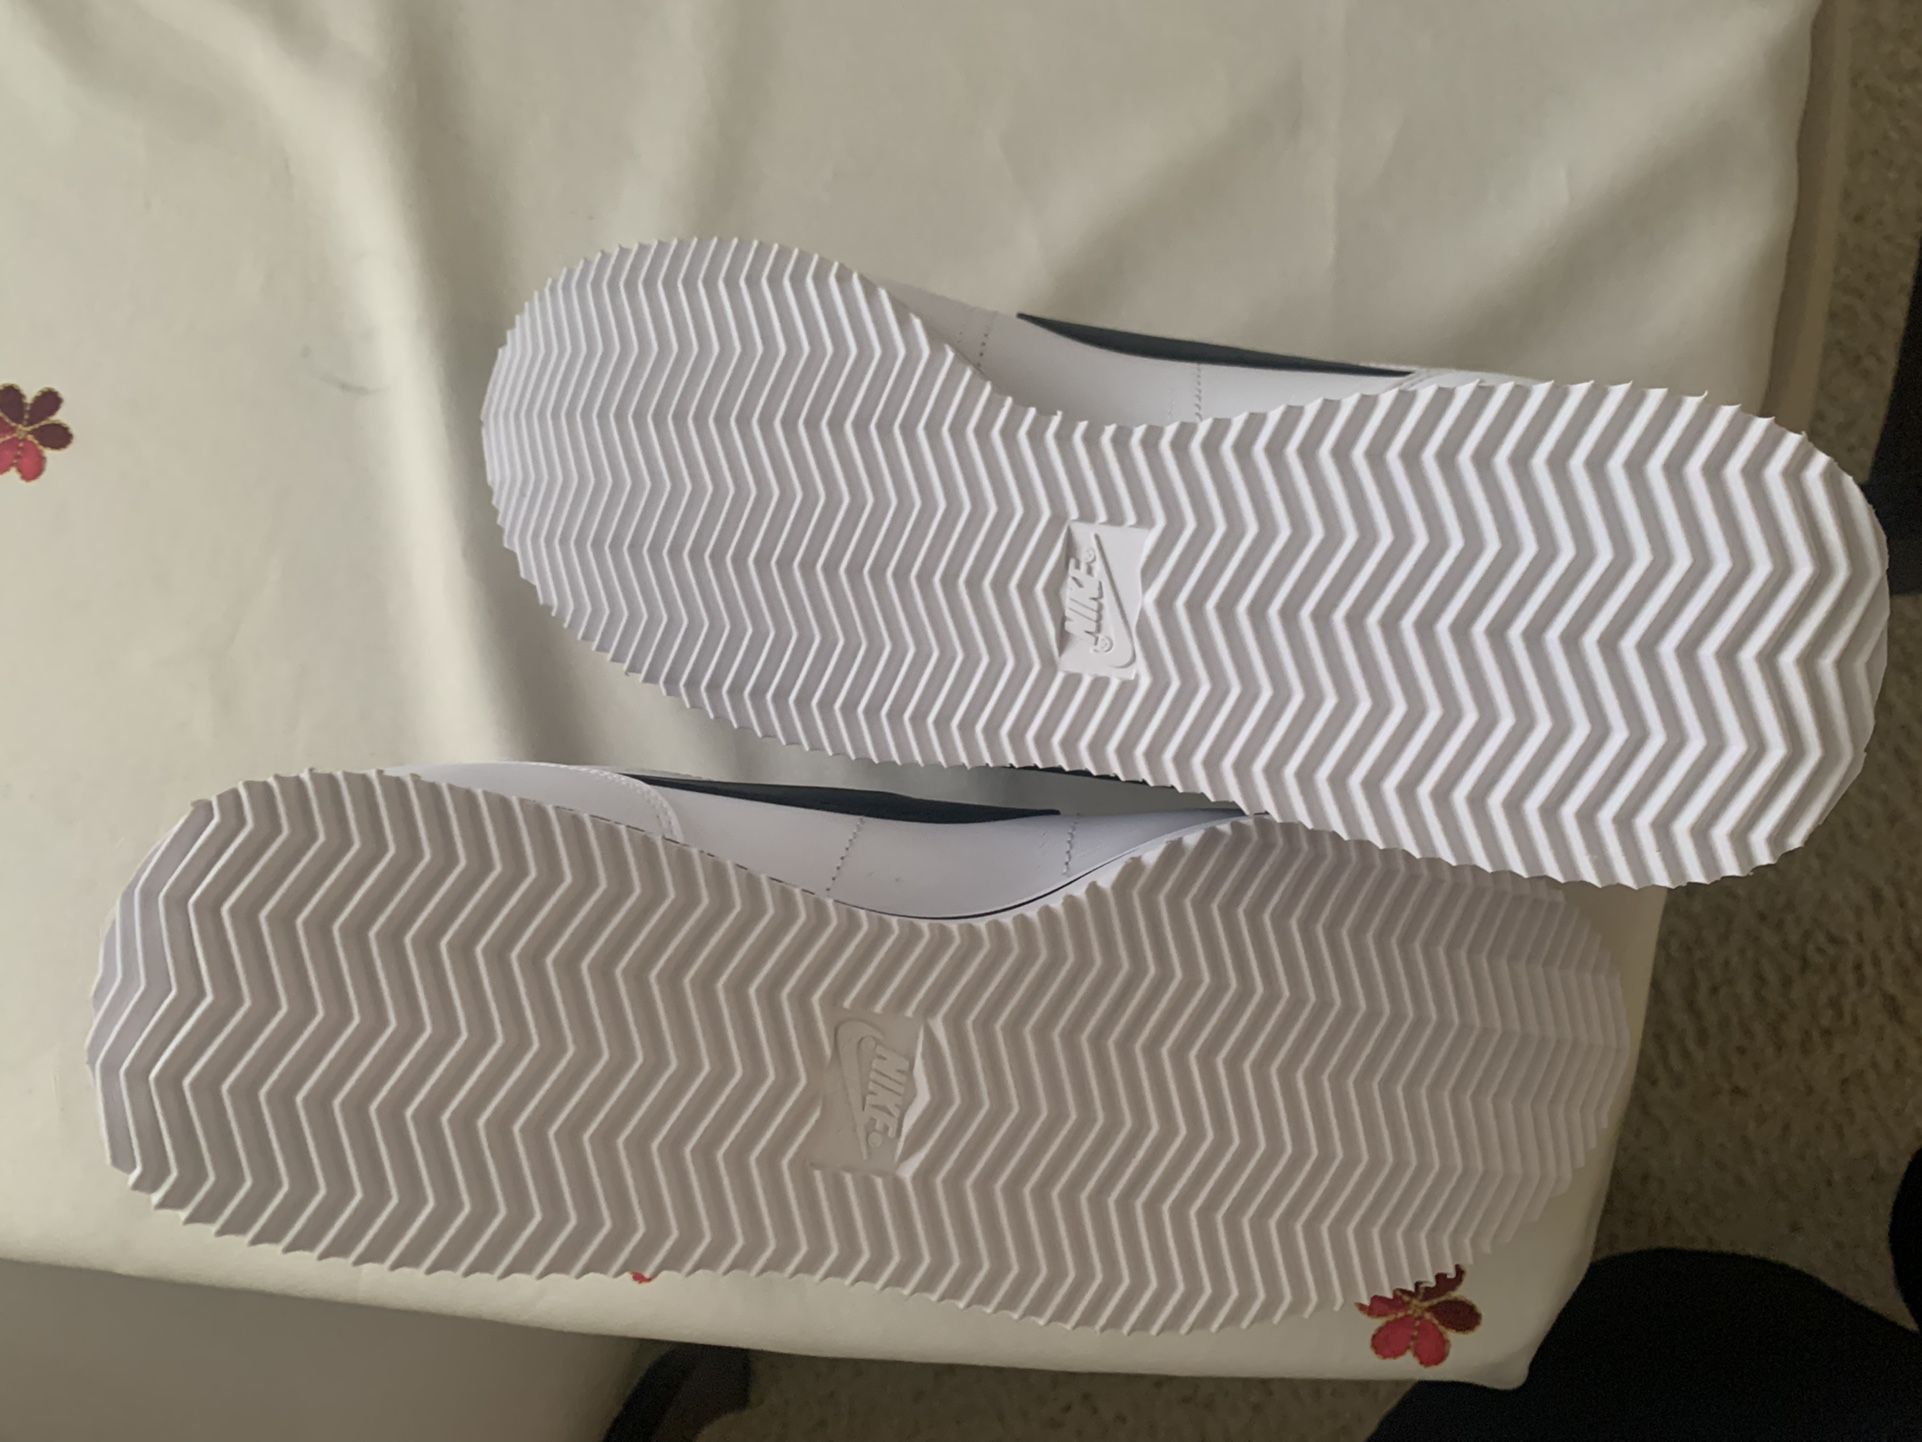 Custom LV Nike Cortez's for Sale in Rancho Cucamonga, CA - OfferUp